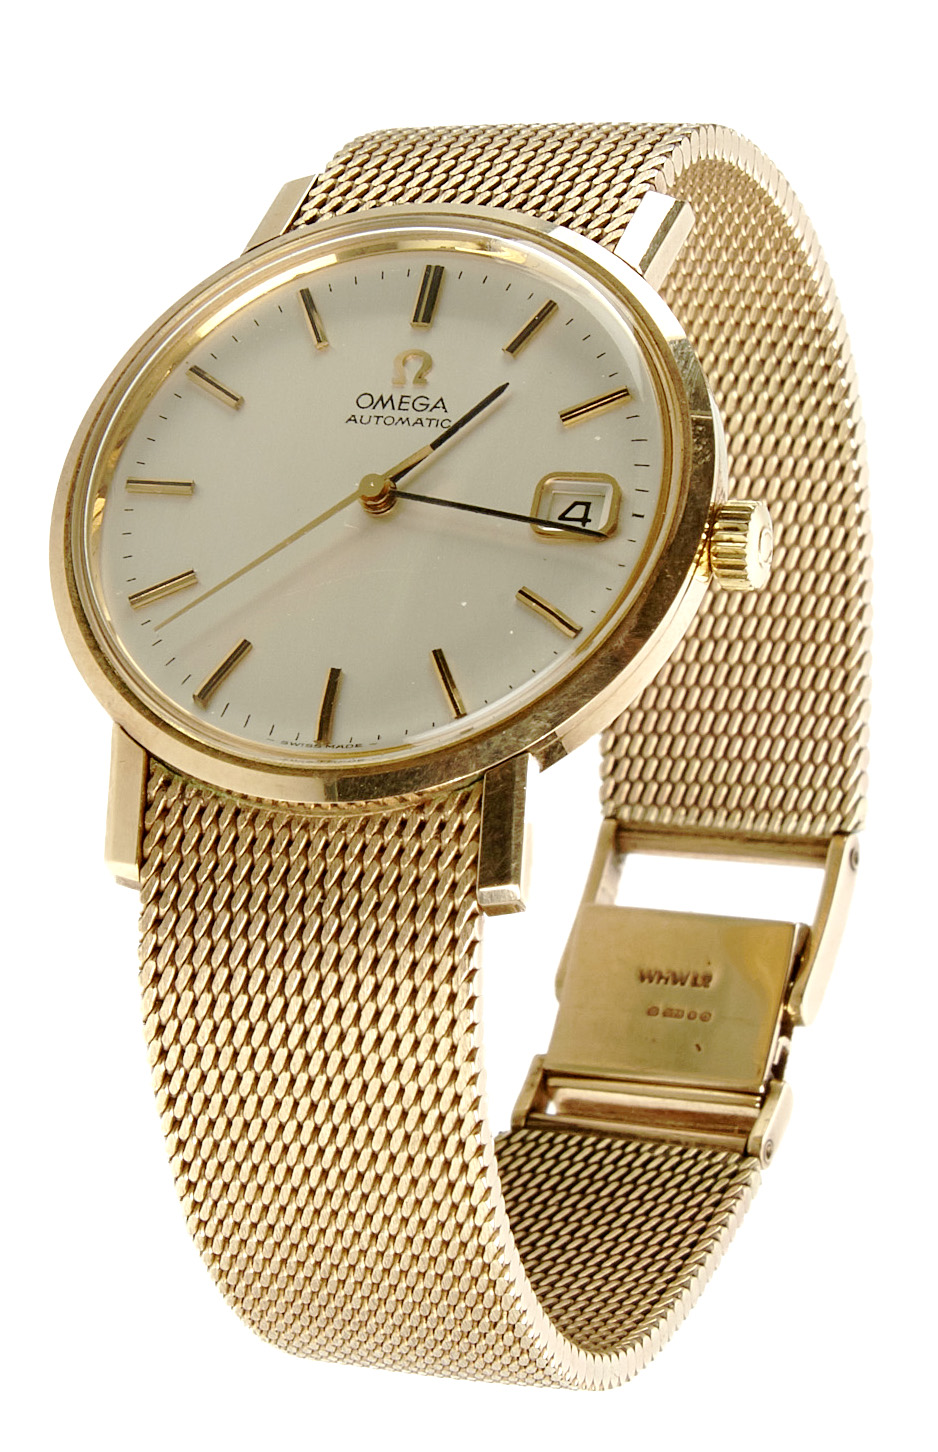 Gent's Omega automatic yellow gold bracelet watch, round white dial applied batons, date window to